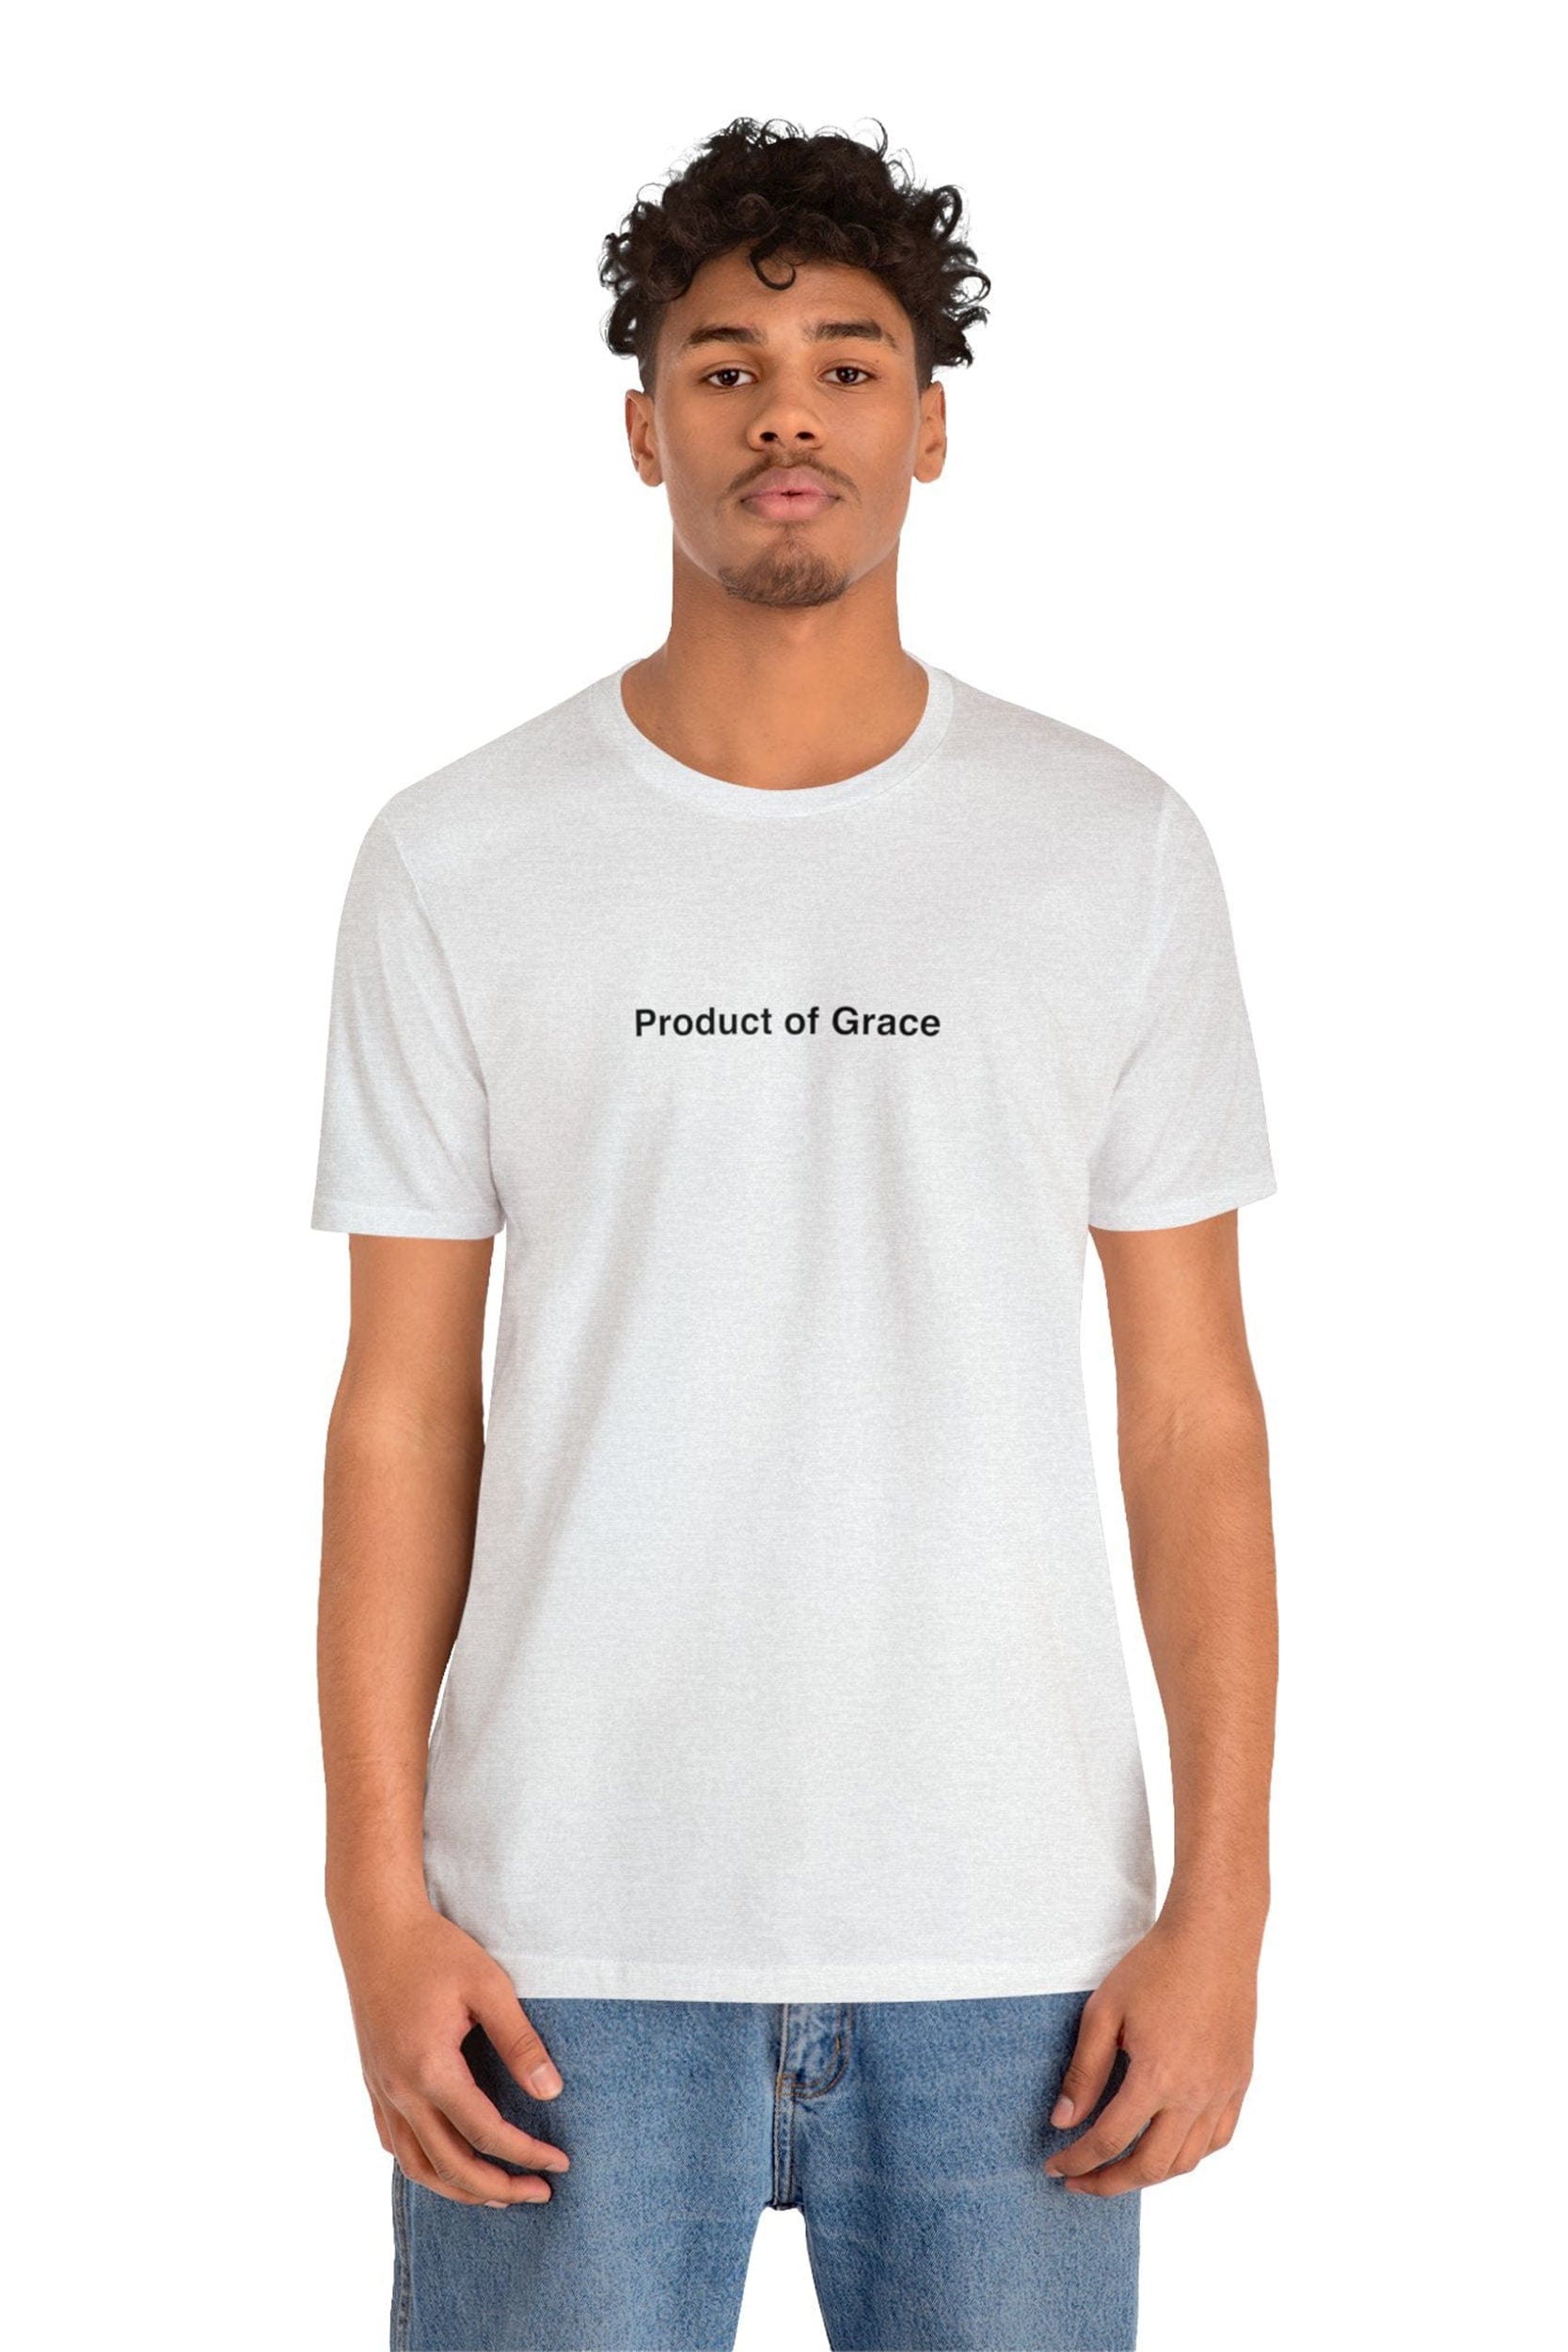 "Product of Grace" T-Shirt